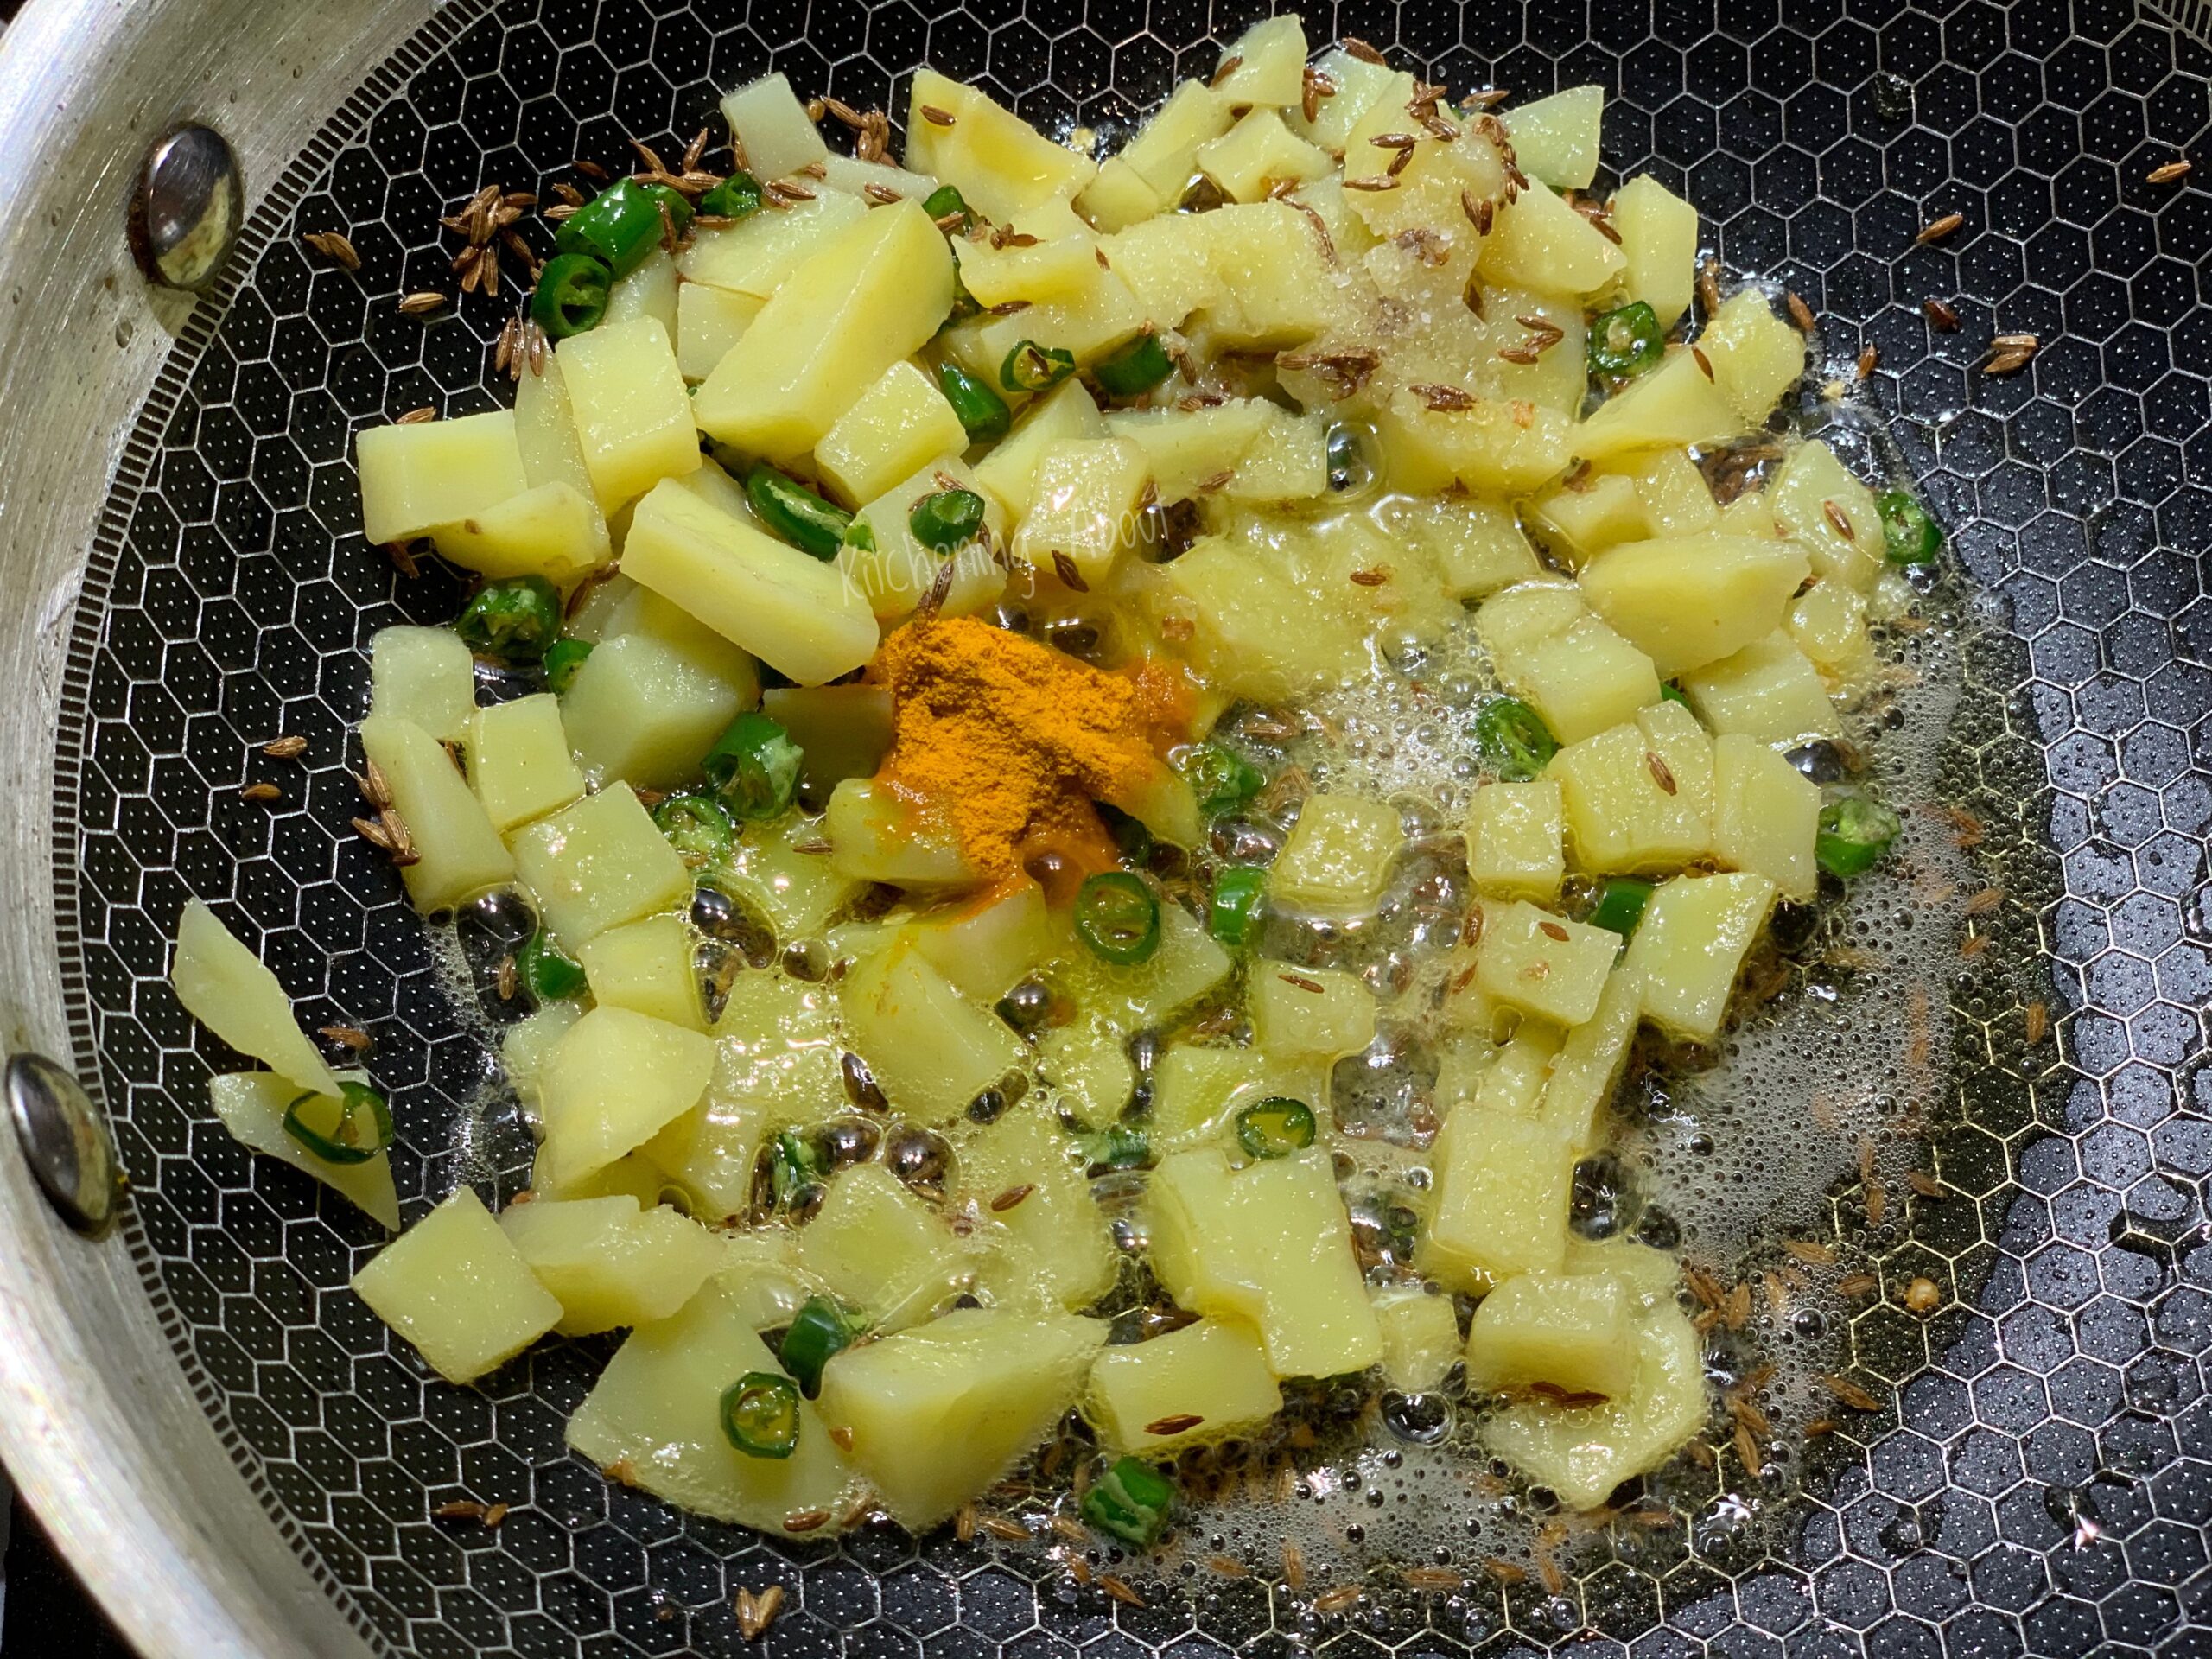 Add potatoes and spices